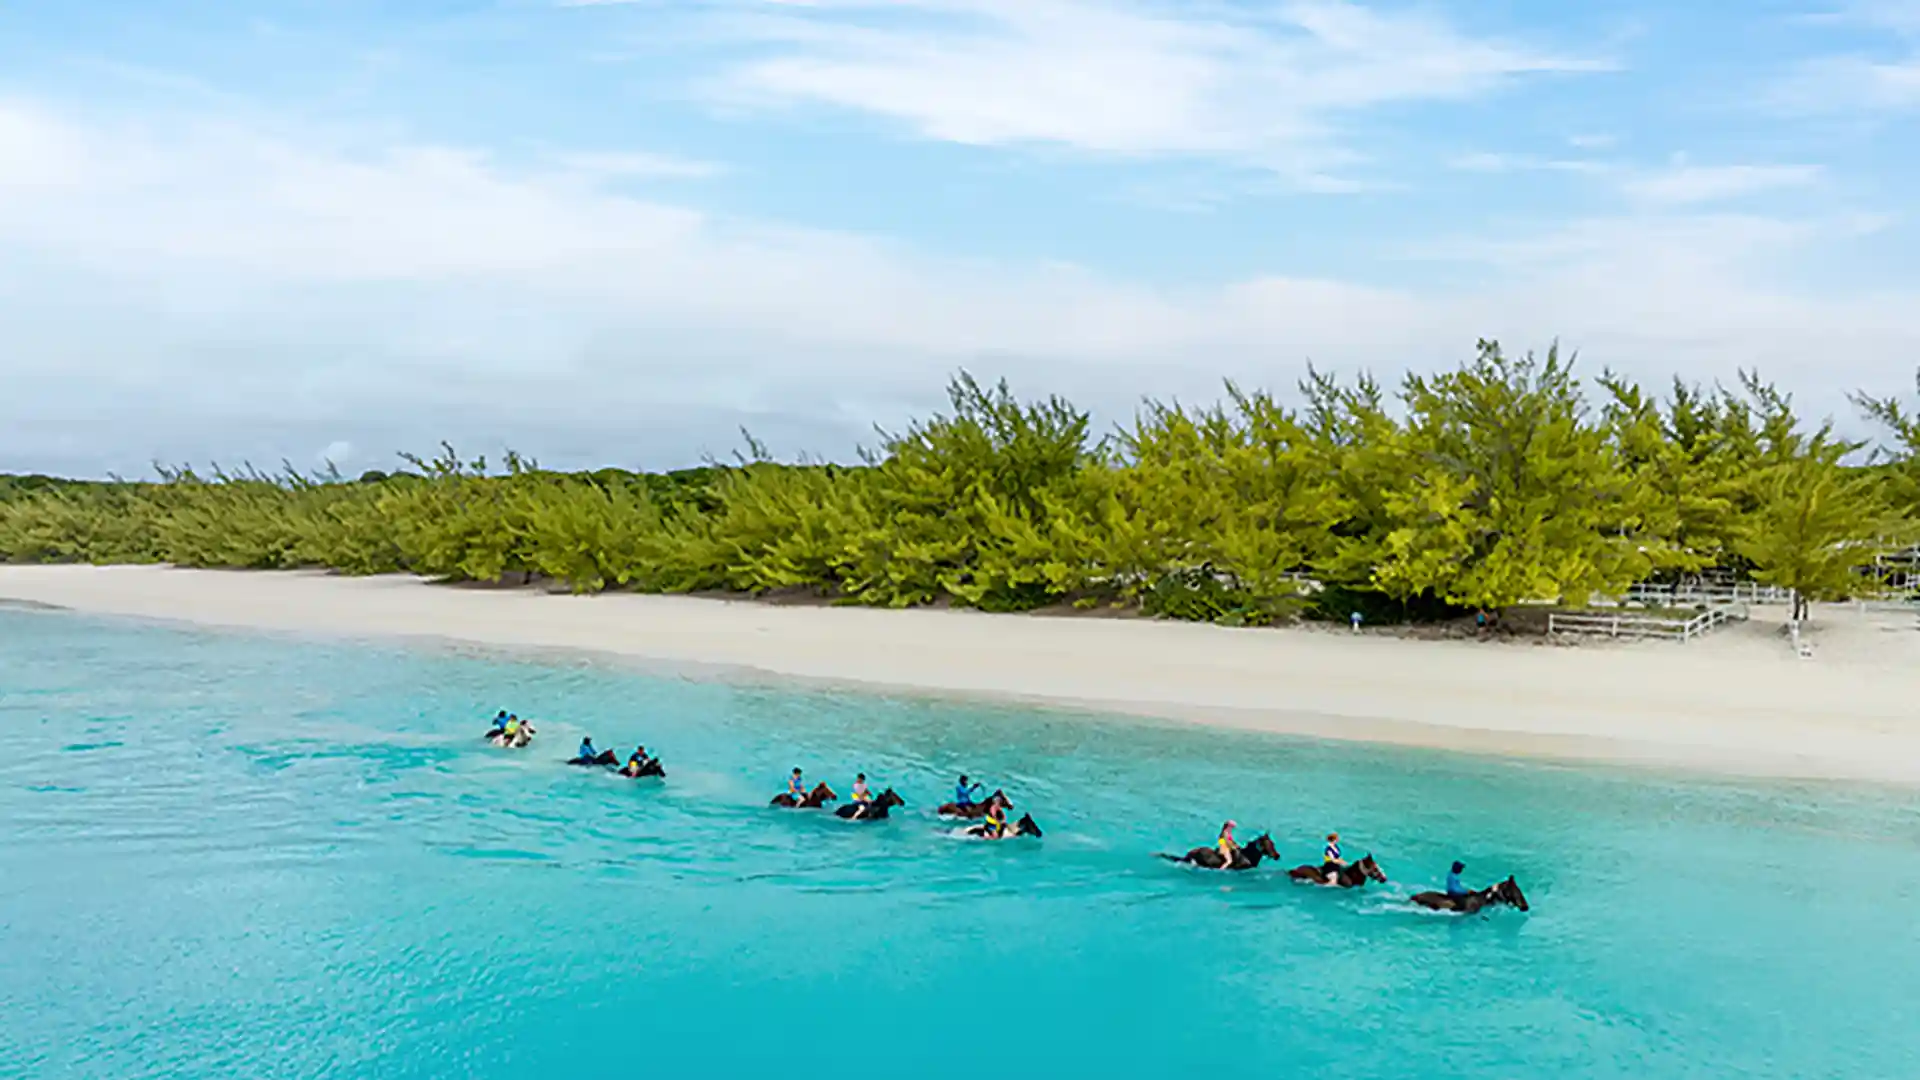 View of people horseback riding through water along Holland America Line's Half Moon Cay in the Bahamas.